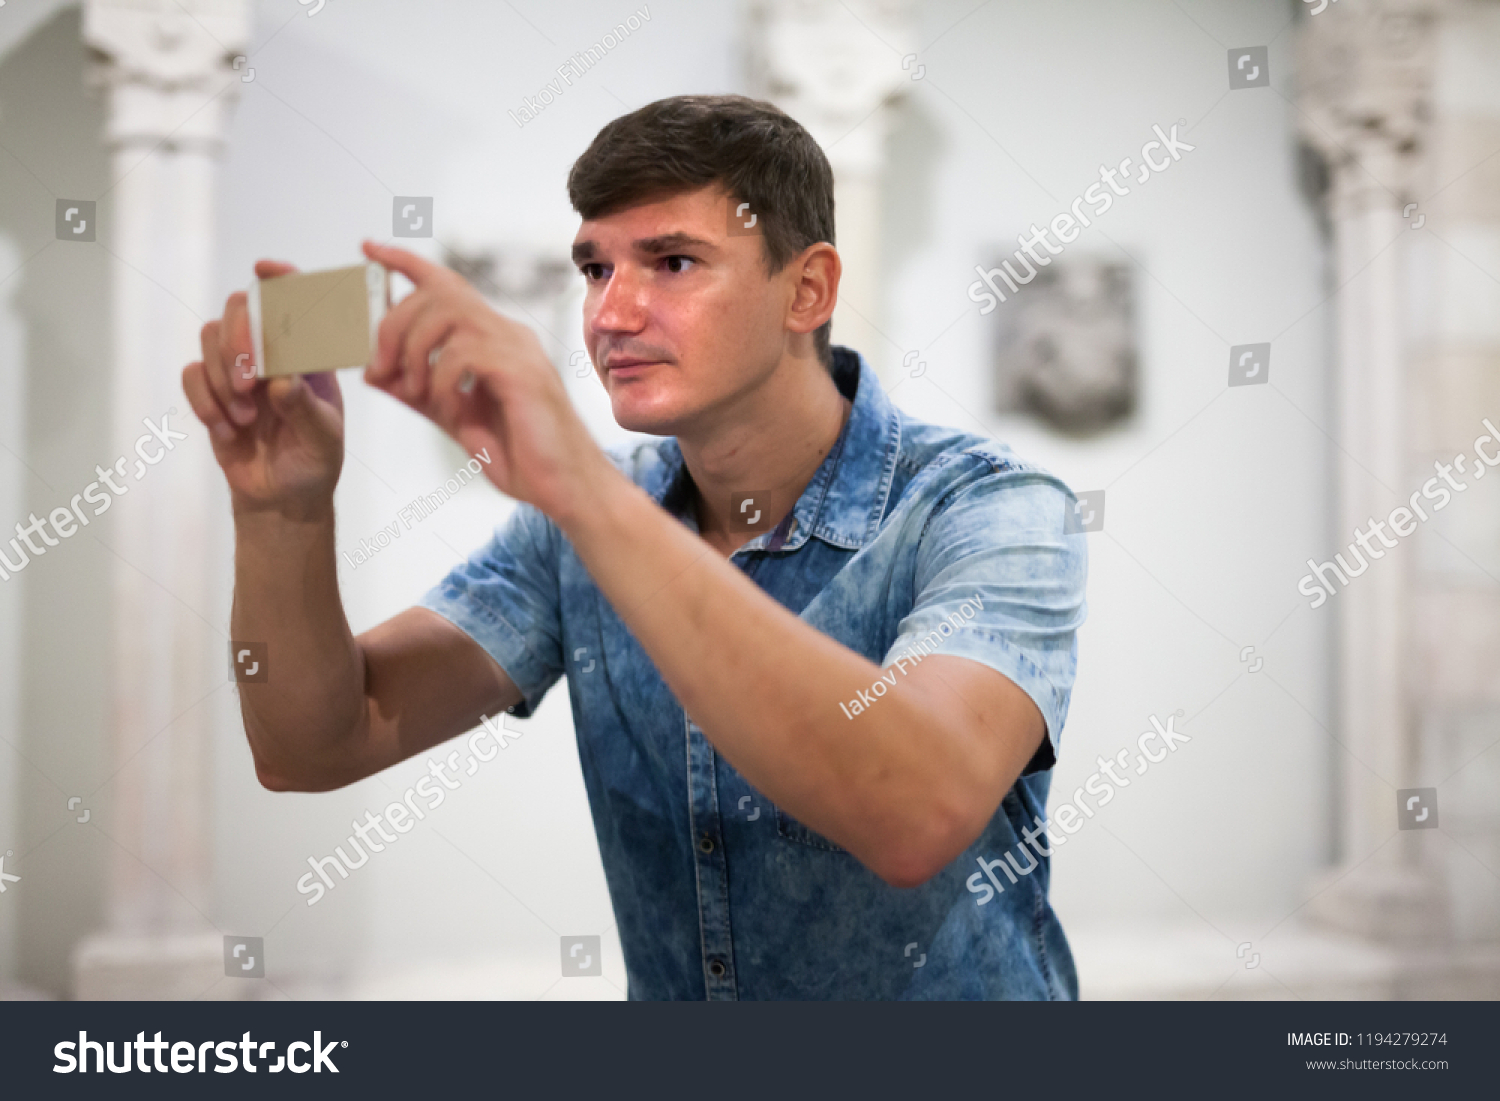 Man looking at exposition of antiquities and taking pictures on his phone in historical museum #1194279274